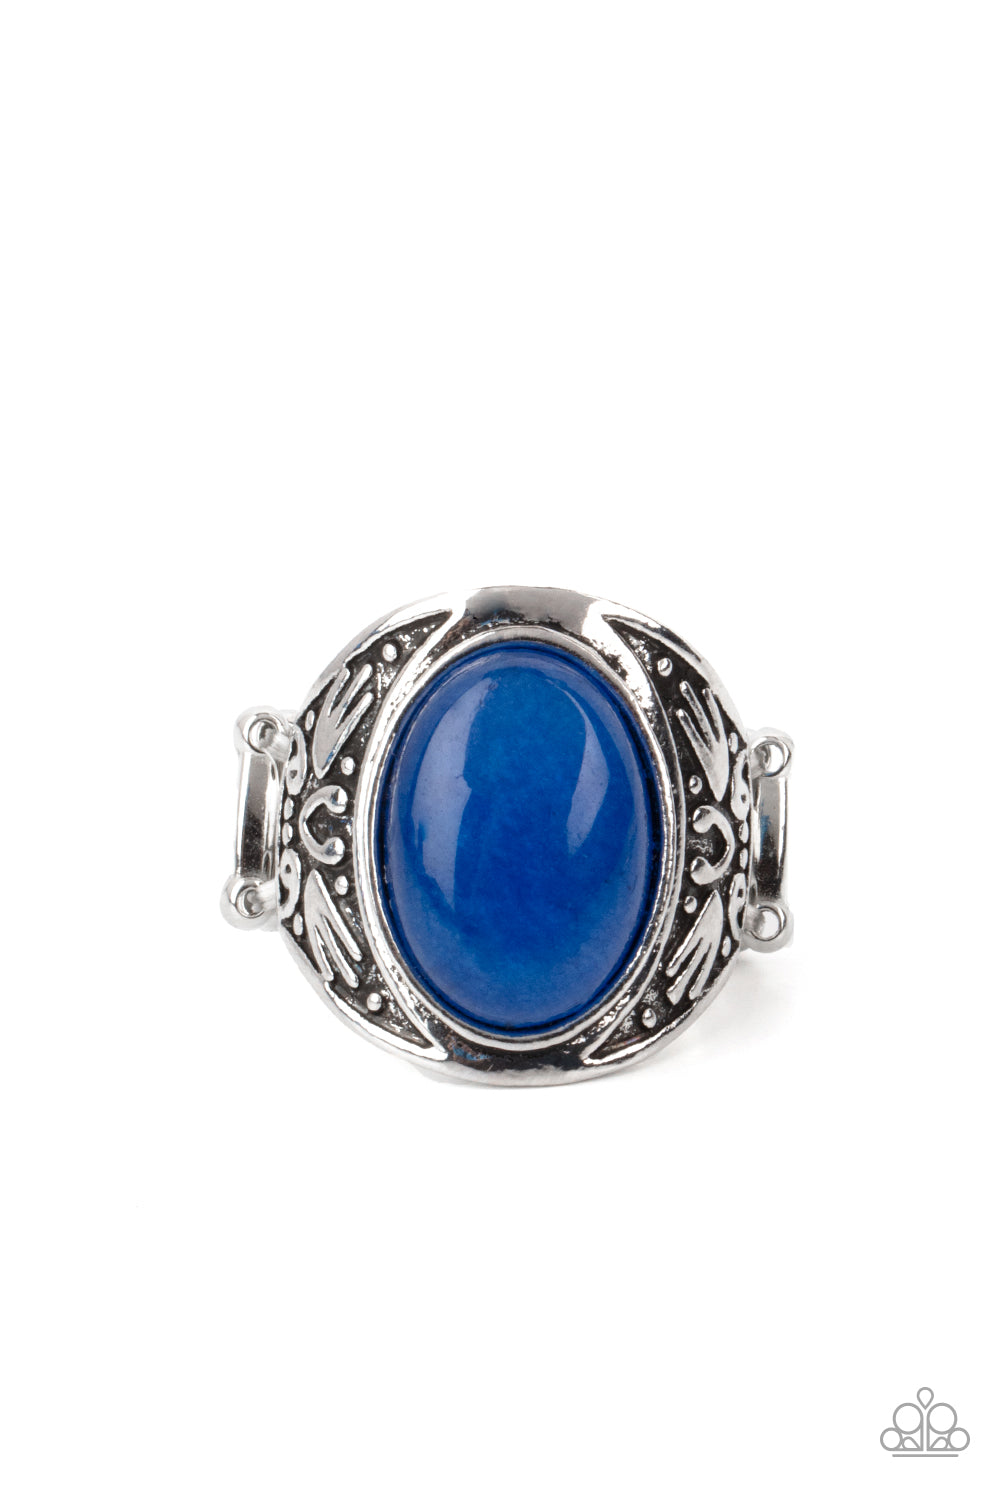 Sedona Dream Blue Ring - Paparazzi Accessories  An oversized lapis lazuli stone is pressed into the center of a thick silver frame embossed in antiqued tribal inspired patterns, creating an enchanting centerpiece atop the finger. Features a stretchy band for a flexible fit.  All Paparazzi Accessories are lead free and nickel free!  Sold as one individual ring.